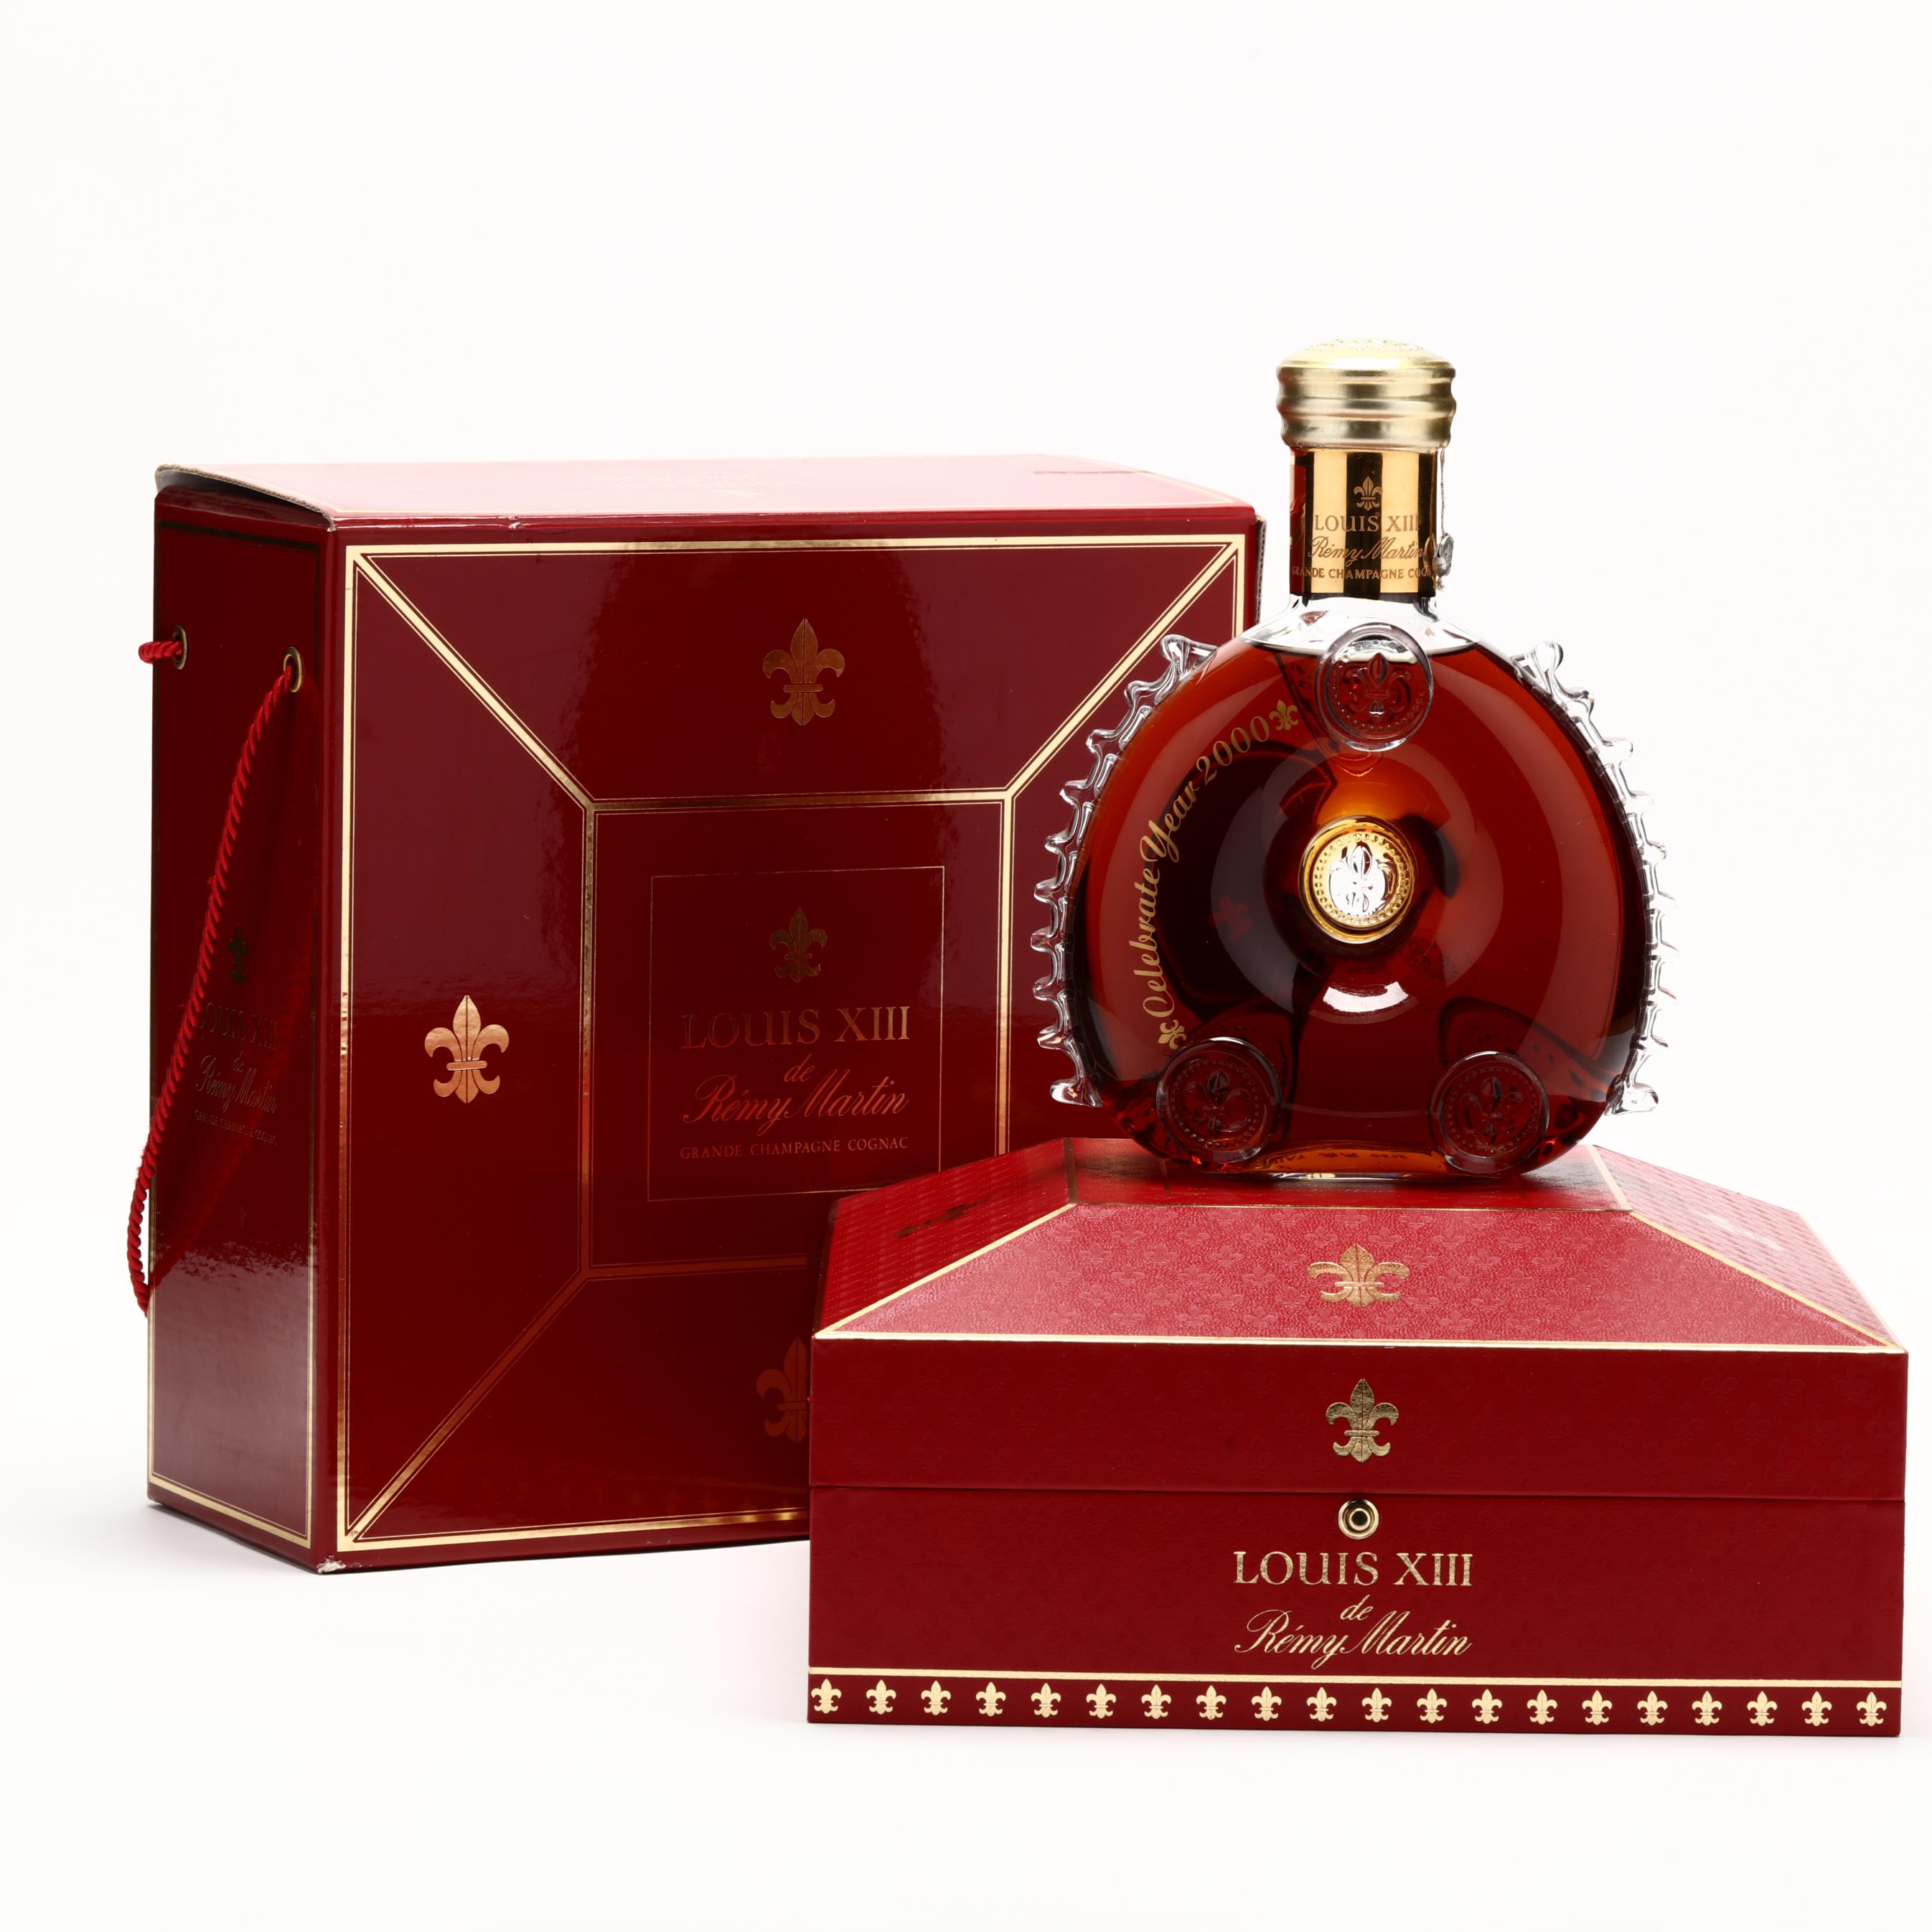 Remy Martin Louis XIII Grand Champagne Cognac Baccarat Bottle